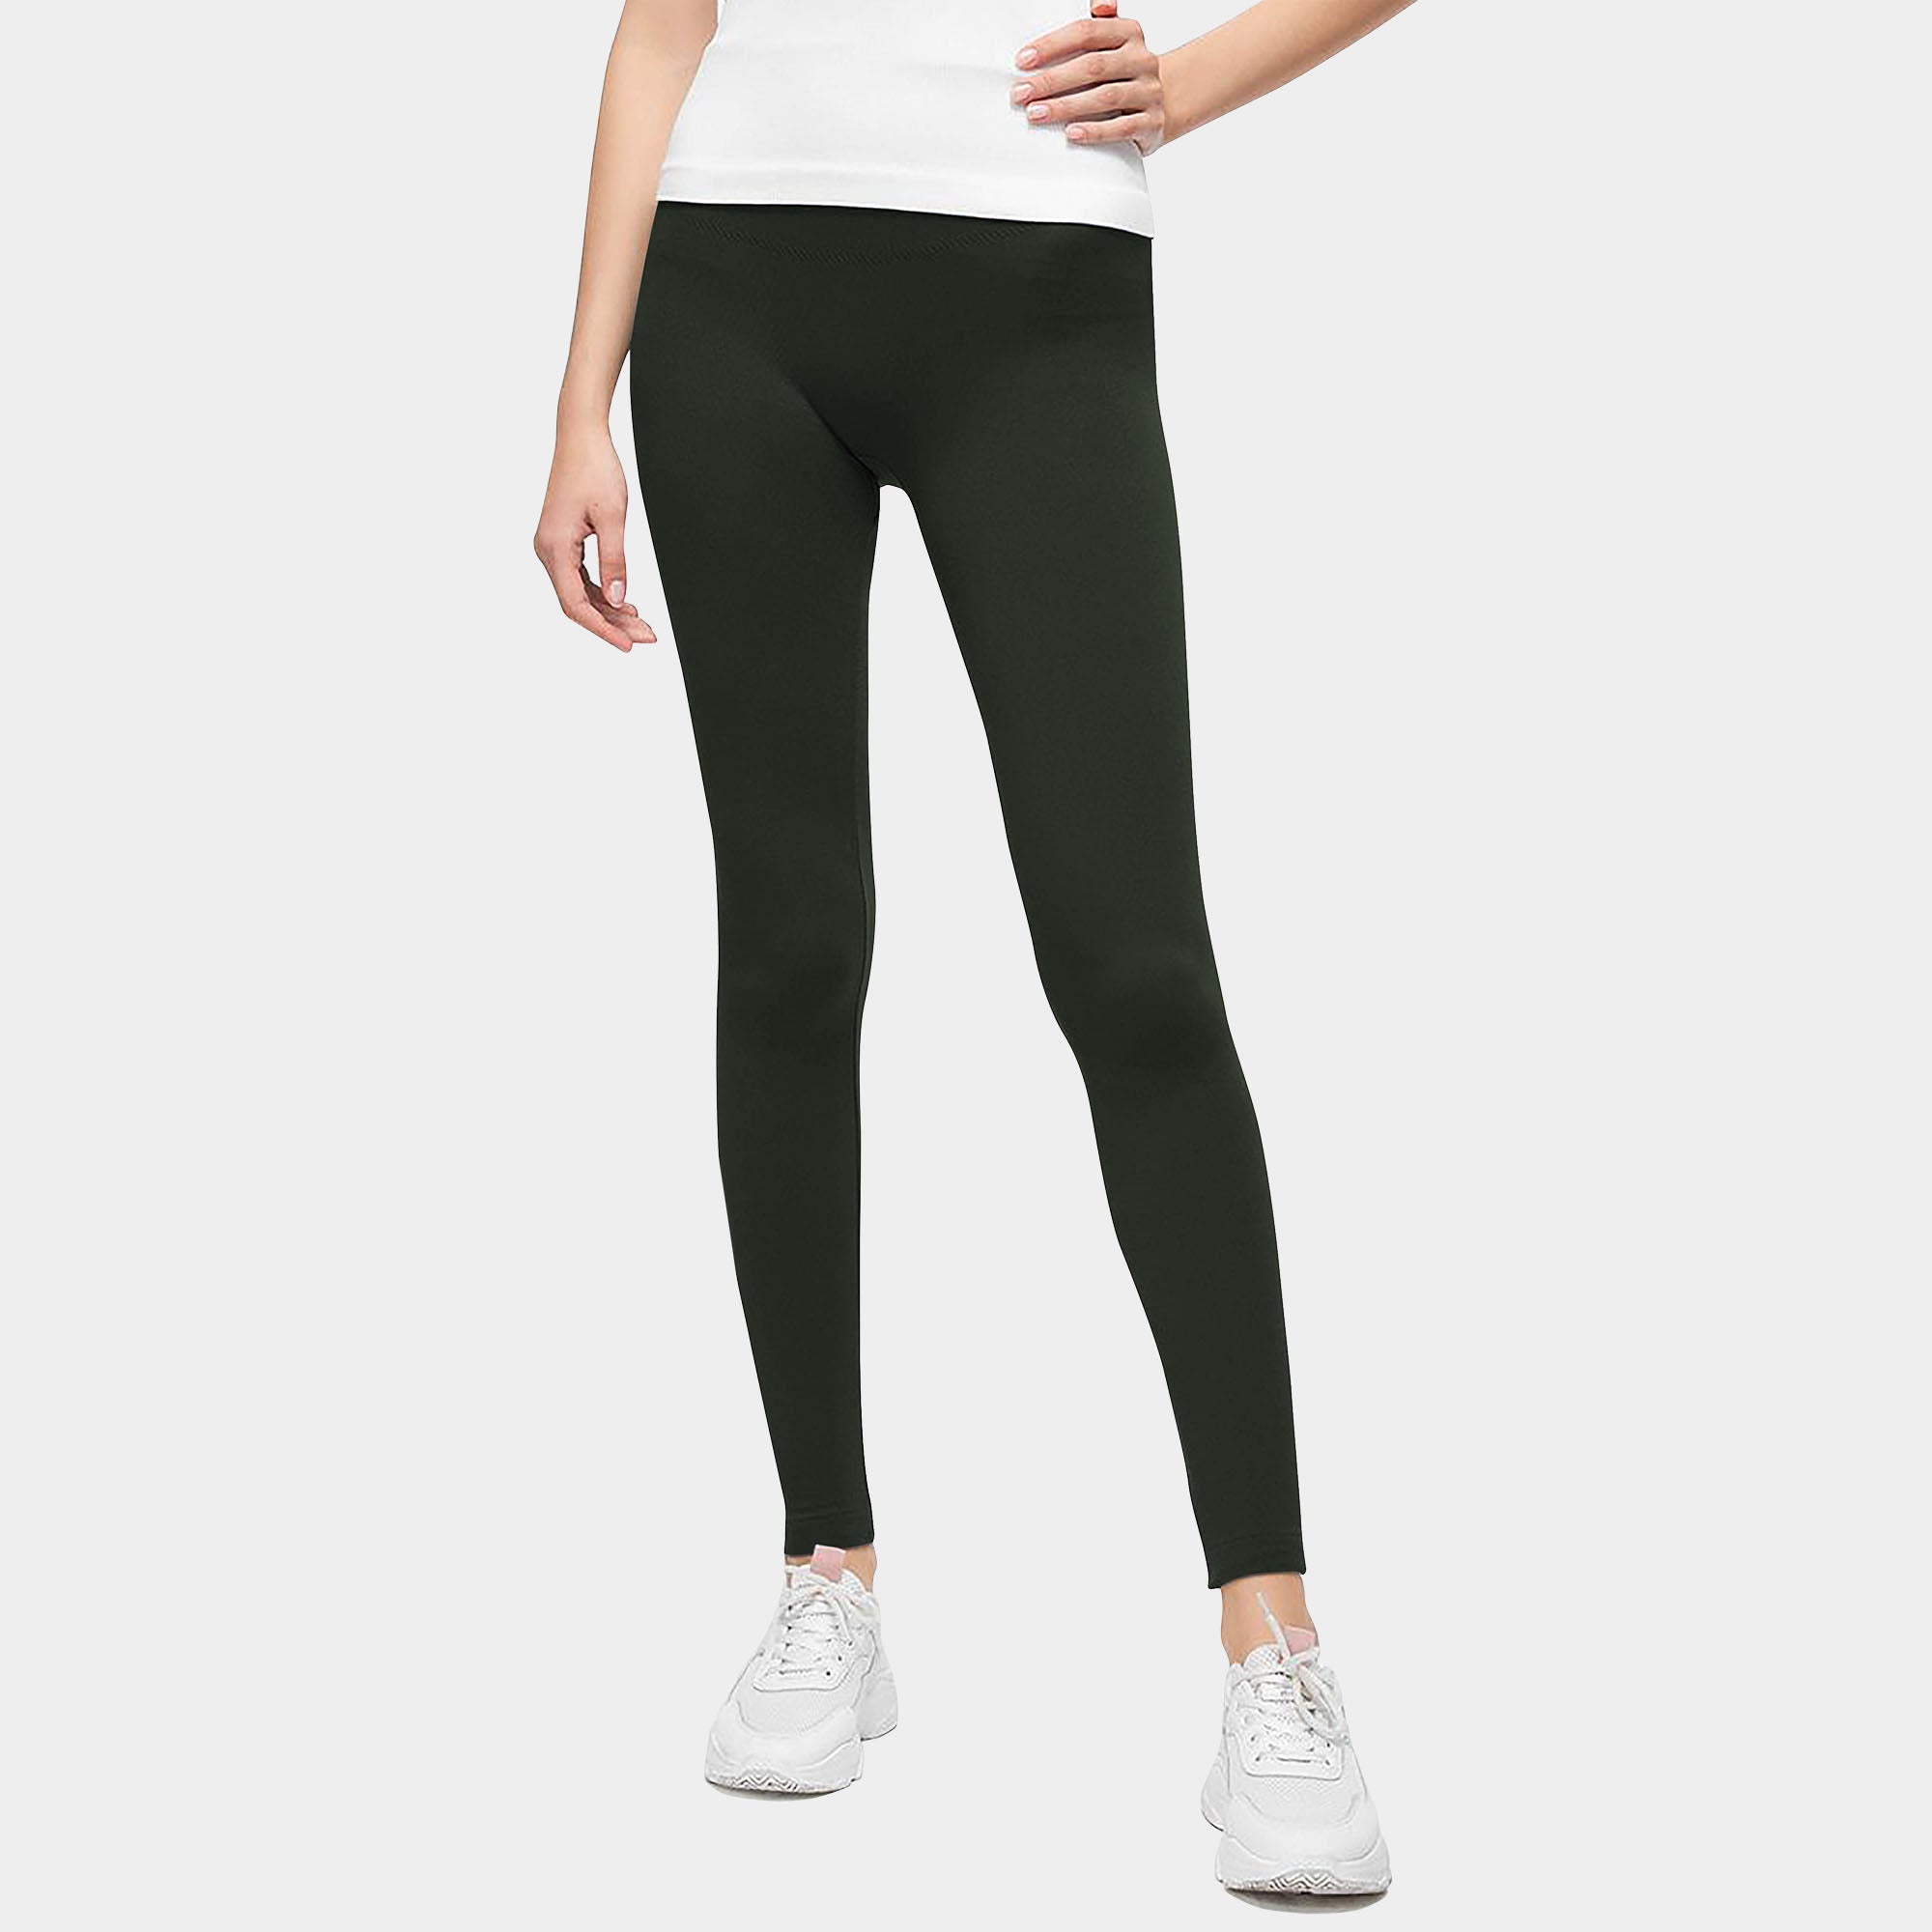 high_waist_inner_soft_lined_waistband_lightweight_yoga_thermal_cozy_comfortable_fashionable_pants_leggins_leggings_spanx_leather_ballet_pilates_polainas_de_las_mujeres_workout_compression_wrinkle_resistant_treggings_best_sexy_jegging_women_girl_girls_womens_spandex_running_winter_squat_thick_cheap_anti_cellulite_pants_sweatpant_sweatpants_ladies_Olive